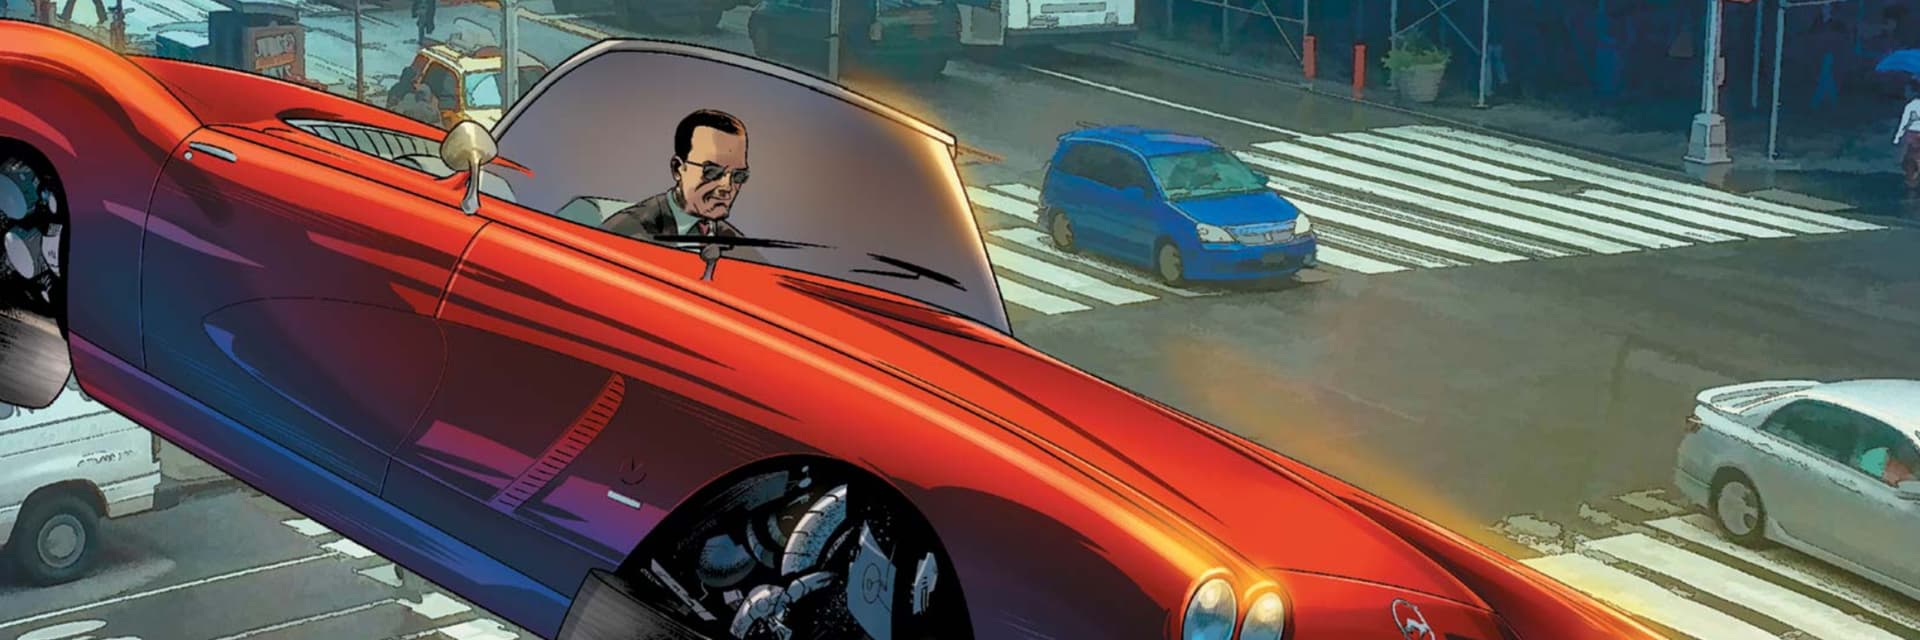 Phil Coulson in his car Lola